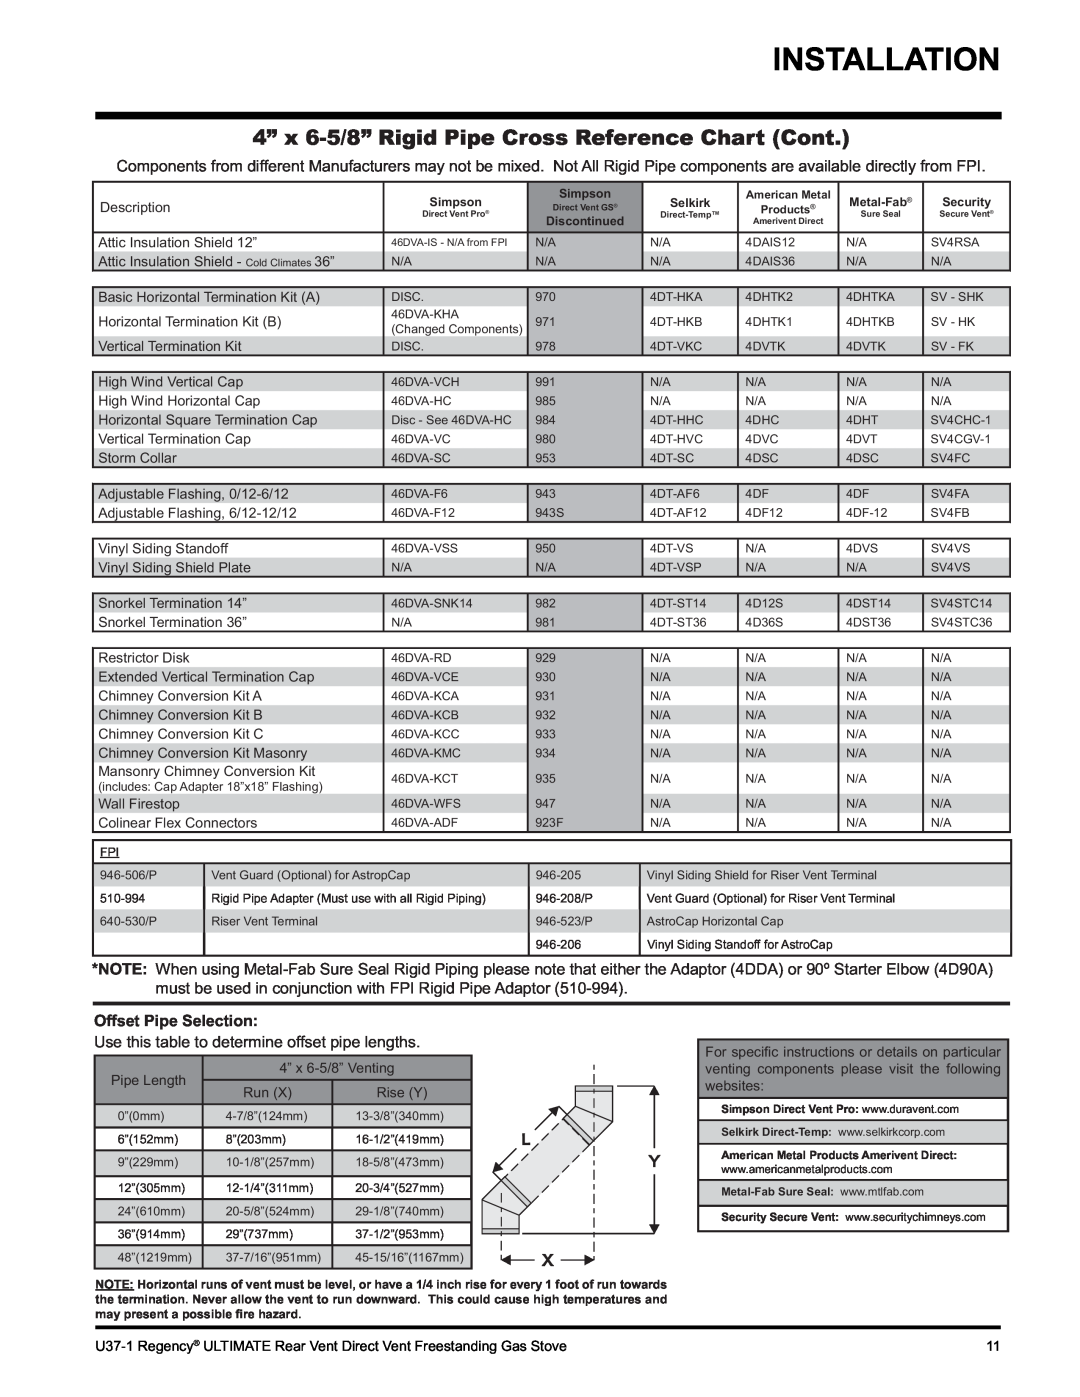 Regency U37-NG1, U37-LP1 installation manual 4” x 6-5/8”Rigid Pipe Cross Reference Chart Cont, Offset Pipe Selection 